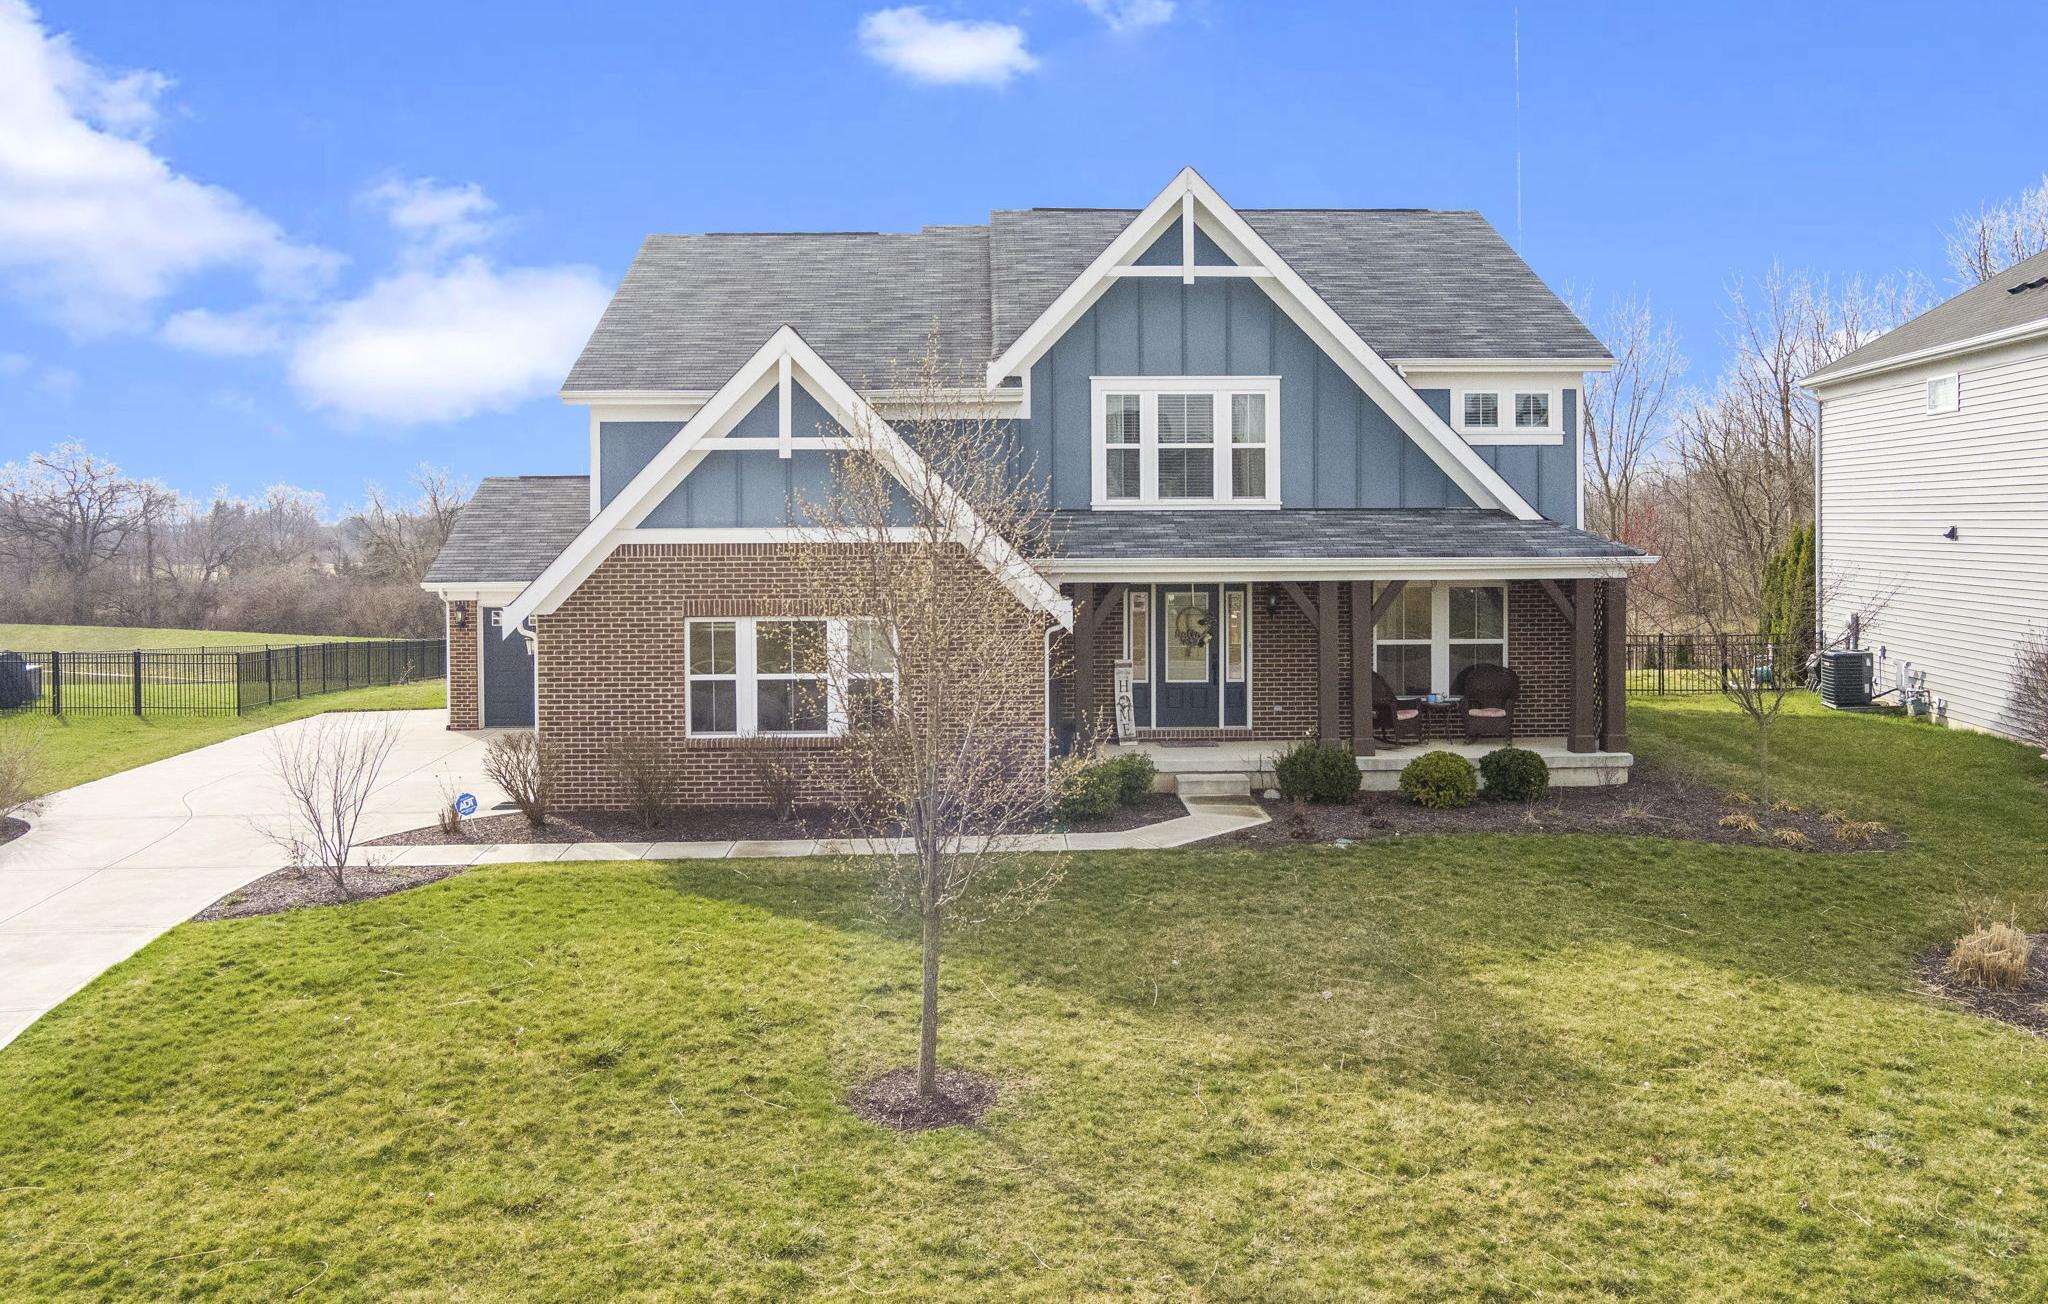 Photo one of 7733 Sunset Ridge Pkwy Indianapolis IN 46259 | MLS 21973216